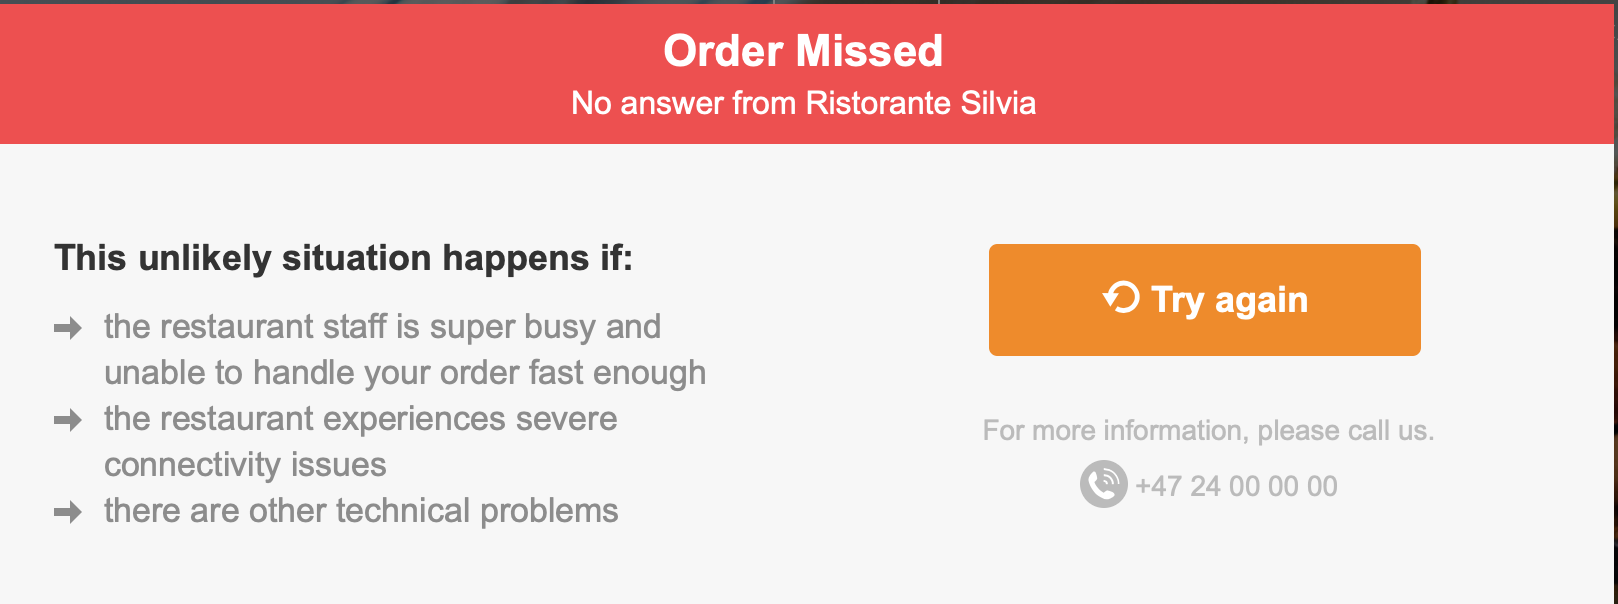 How to relaunch a missed or rejected order? 2